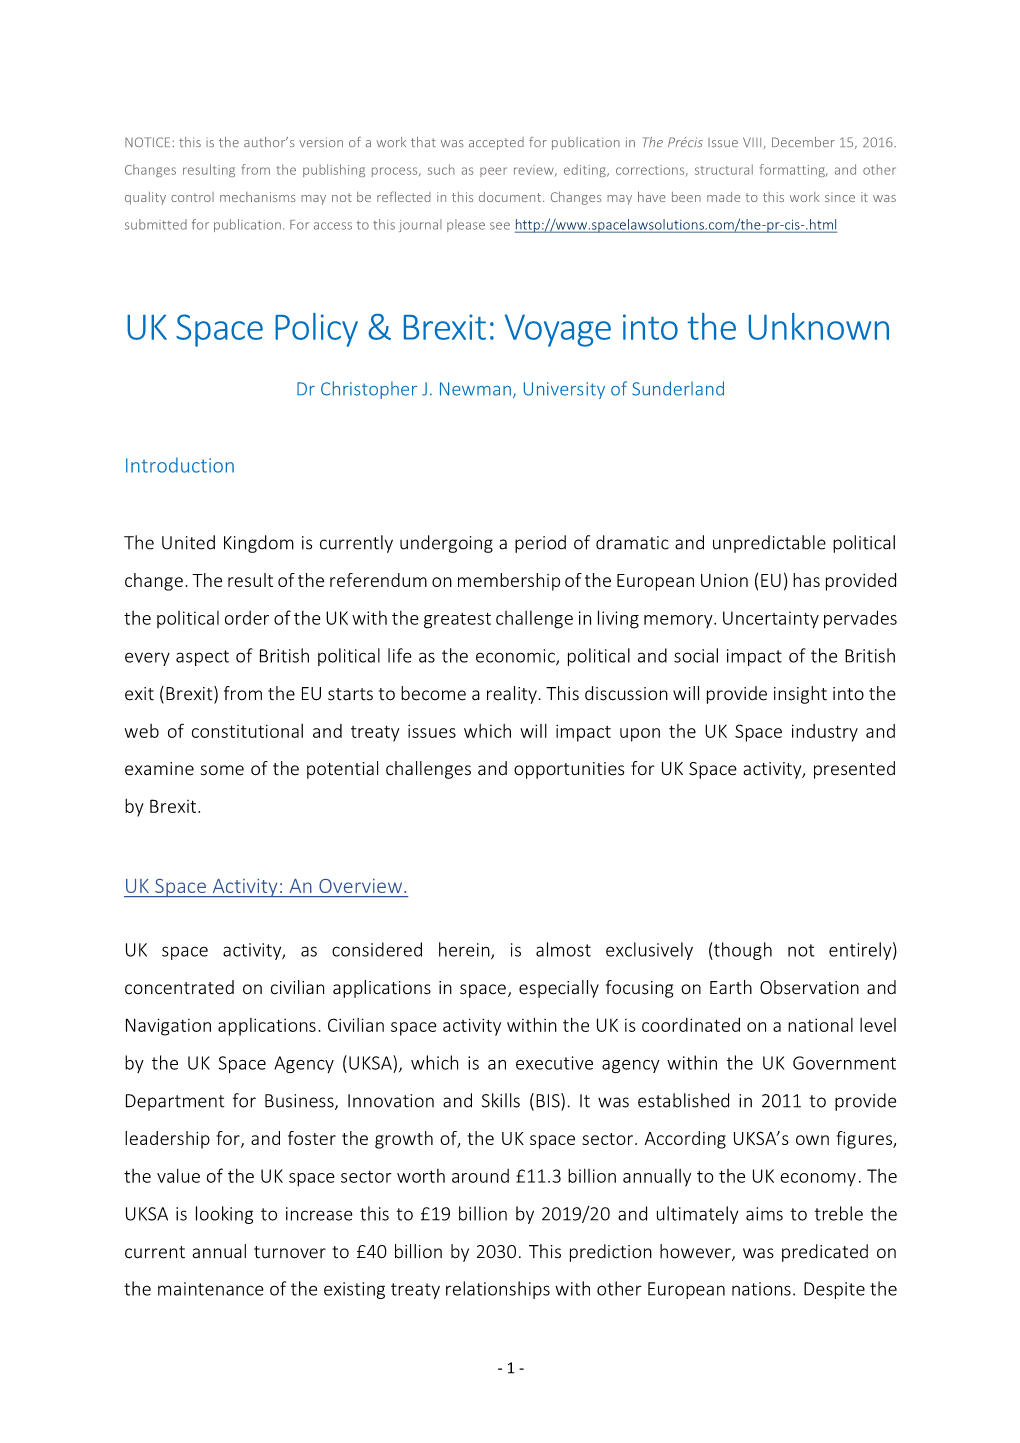 UK Space Policy & Brexit: Voyage Into the Unknown